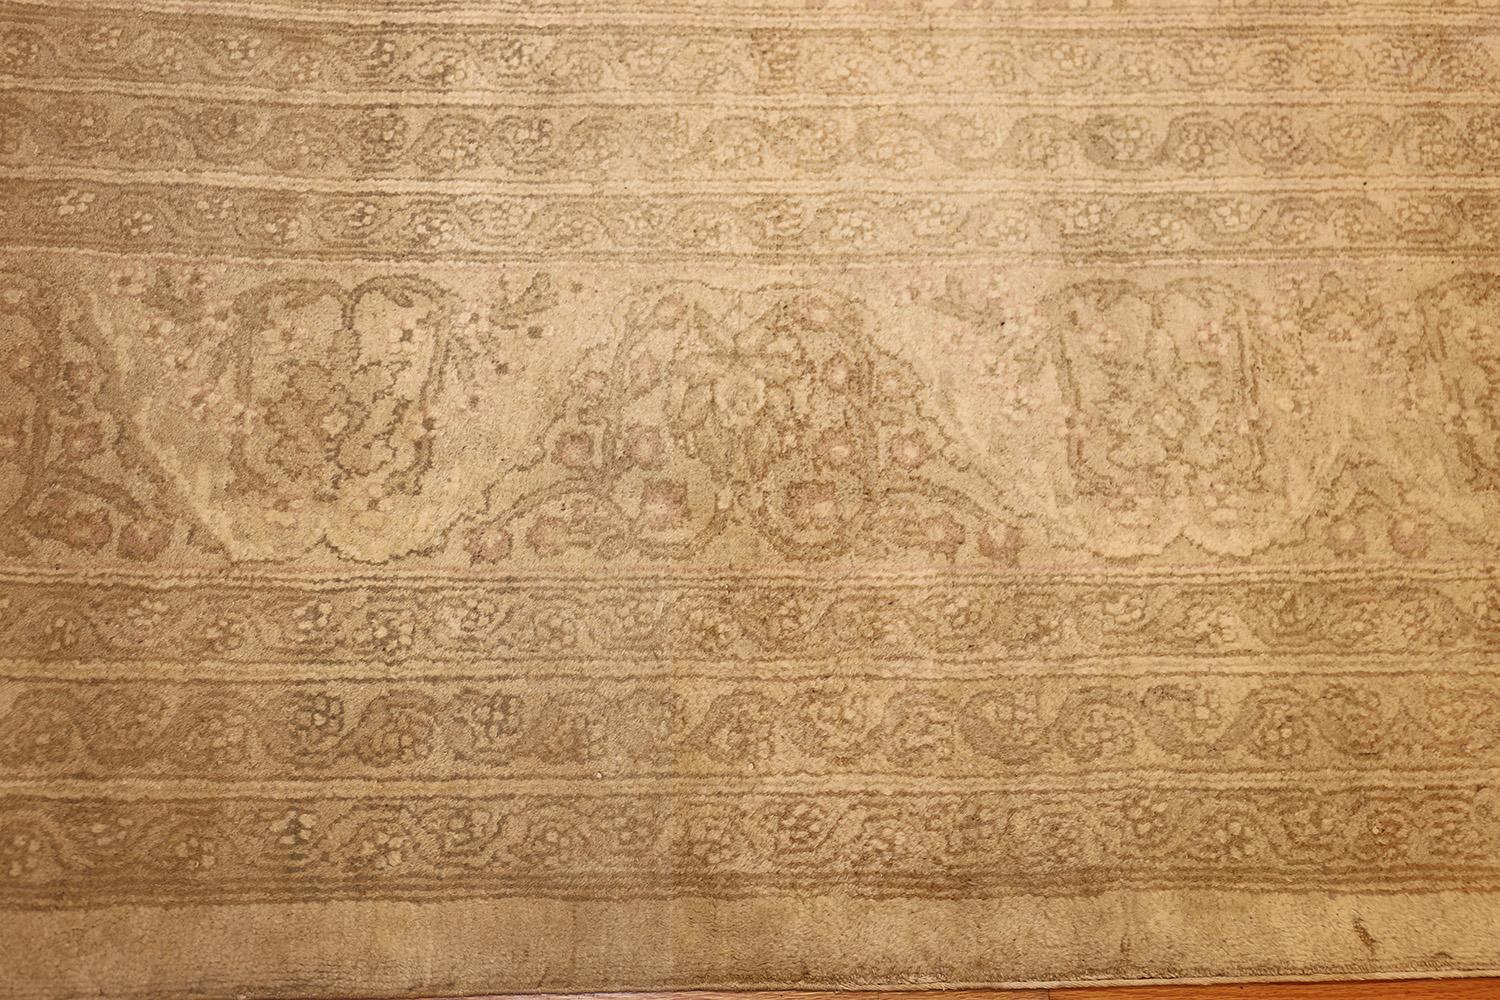 Antique Agra Rug, Country of Origin: India, Circa date: 1900. Size: 12 ft x 13 ft 10 in (3.66 m x 4.22 m)

